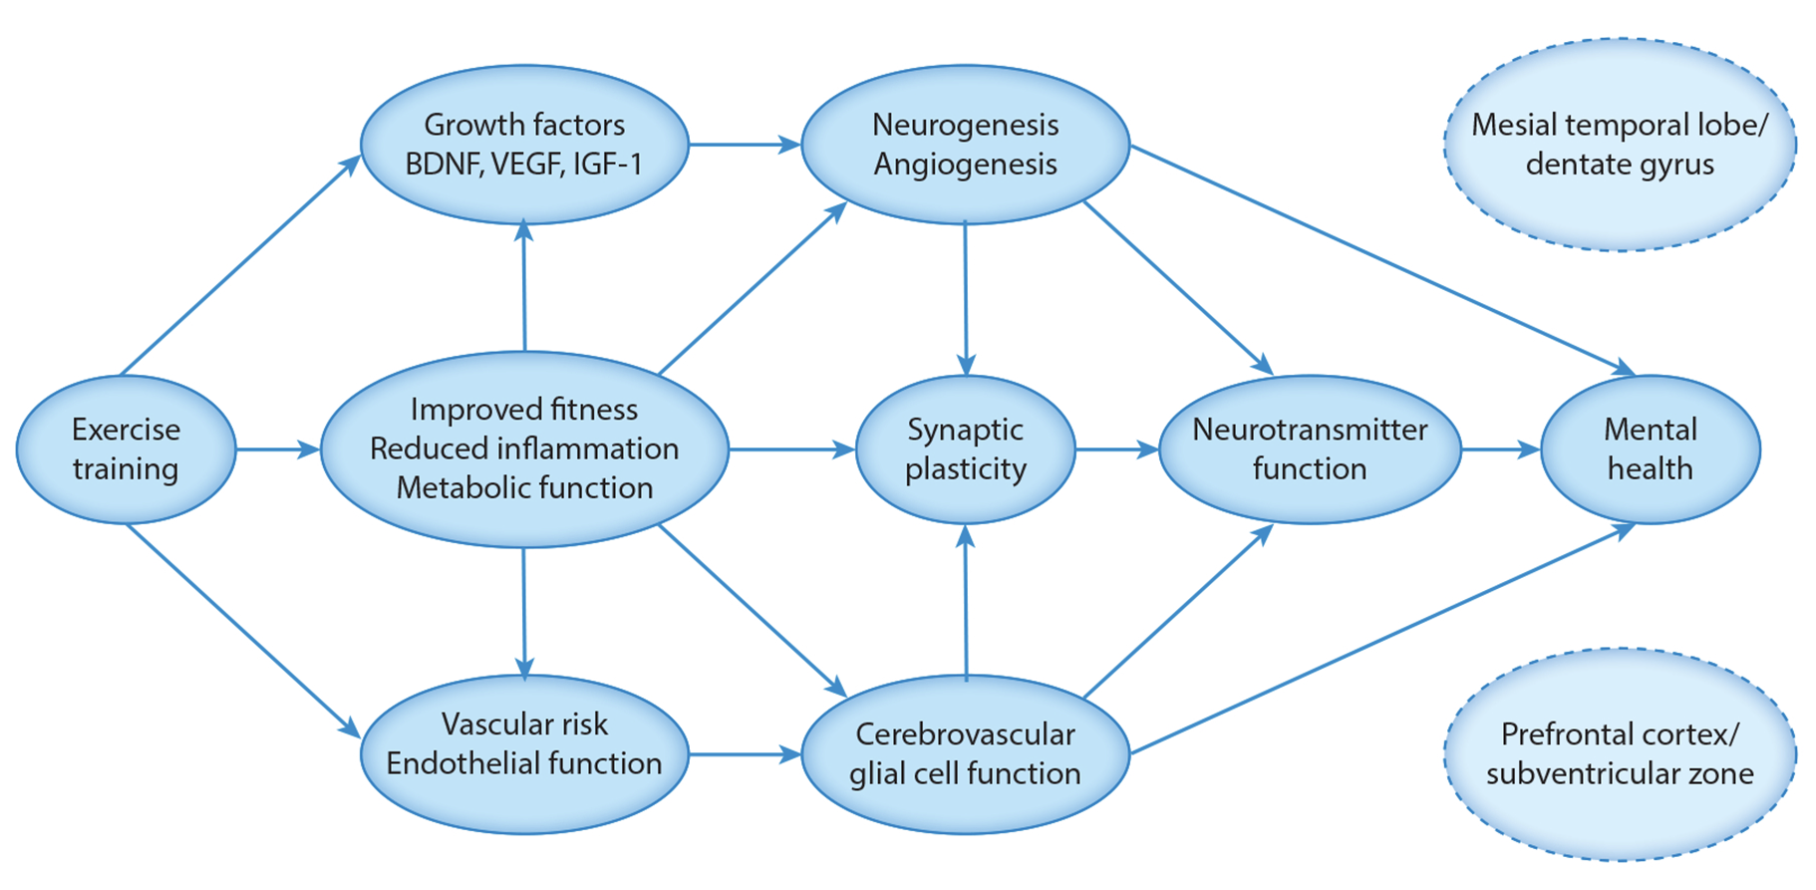 Conceptual model of neurobiological mechanisms by which exercise training improves mental health outcomes. Abbreviations: BDNF, brain-derived neurotrophic factor; IGF-1, insulin-like growth factor 1; VEGF, vascular endothelial growth factor.